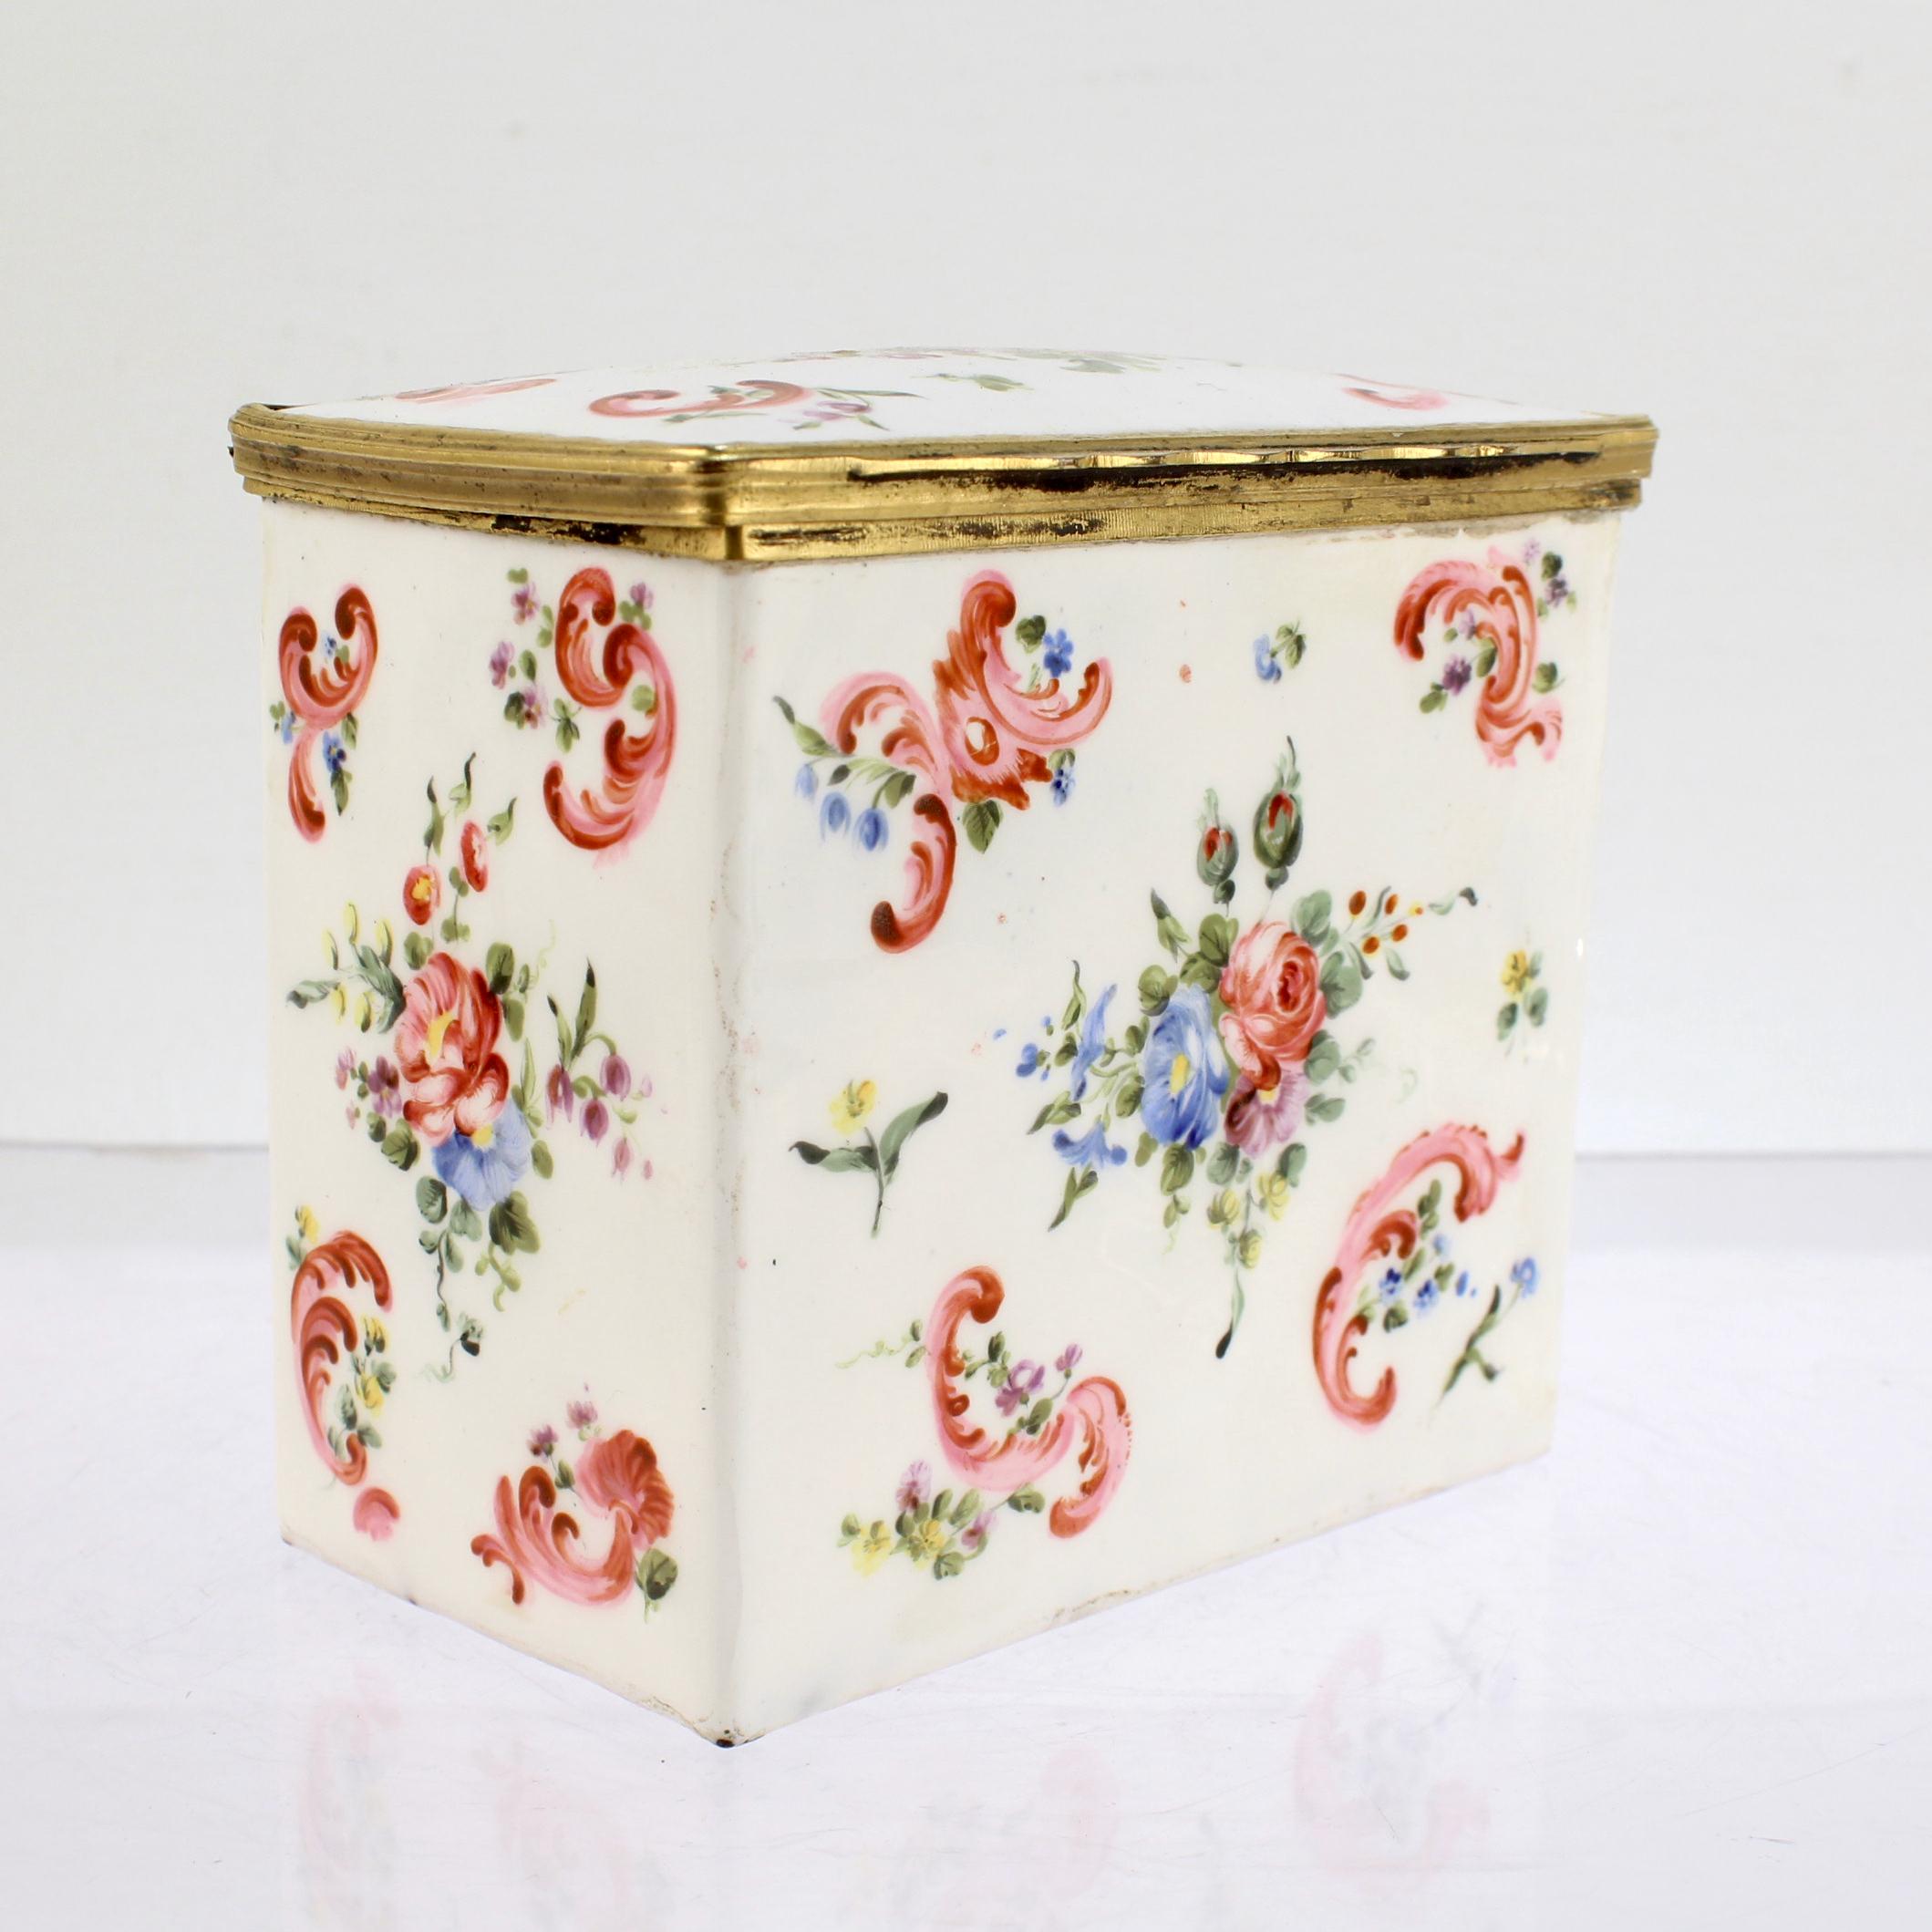 A fine antique enamel tea caddy.

With a gilt bronze mounted lid. 

In the South Staffordshire manner.

Decorated with floral sprays and rocaille swags to all sides. 

Likely French or made by the English for the French Market. 

Simply a